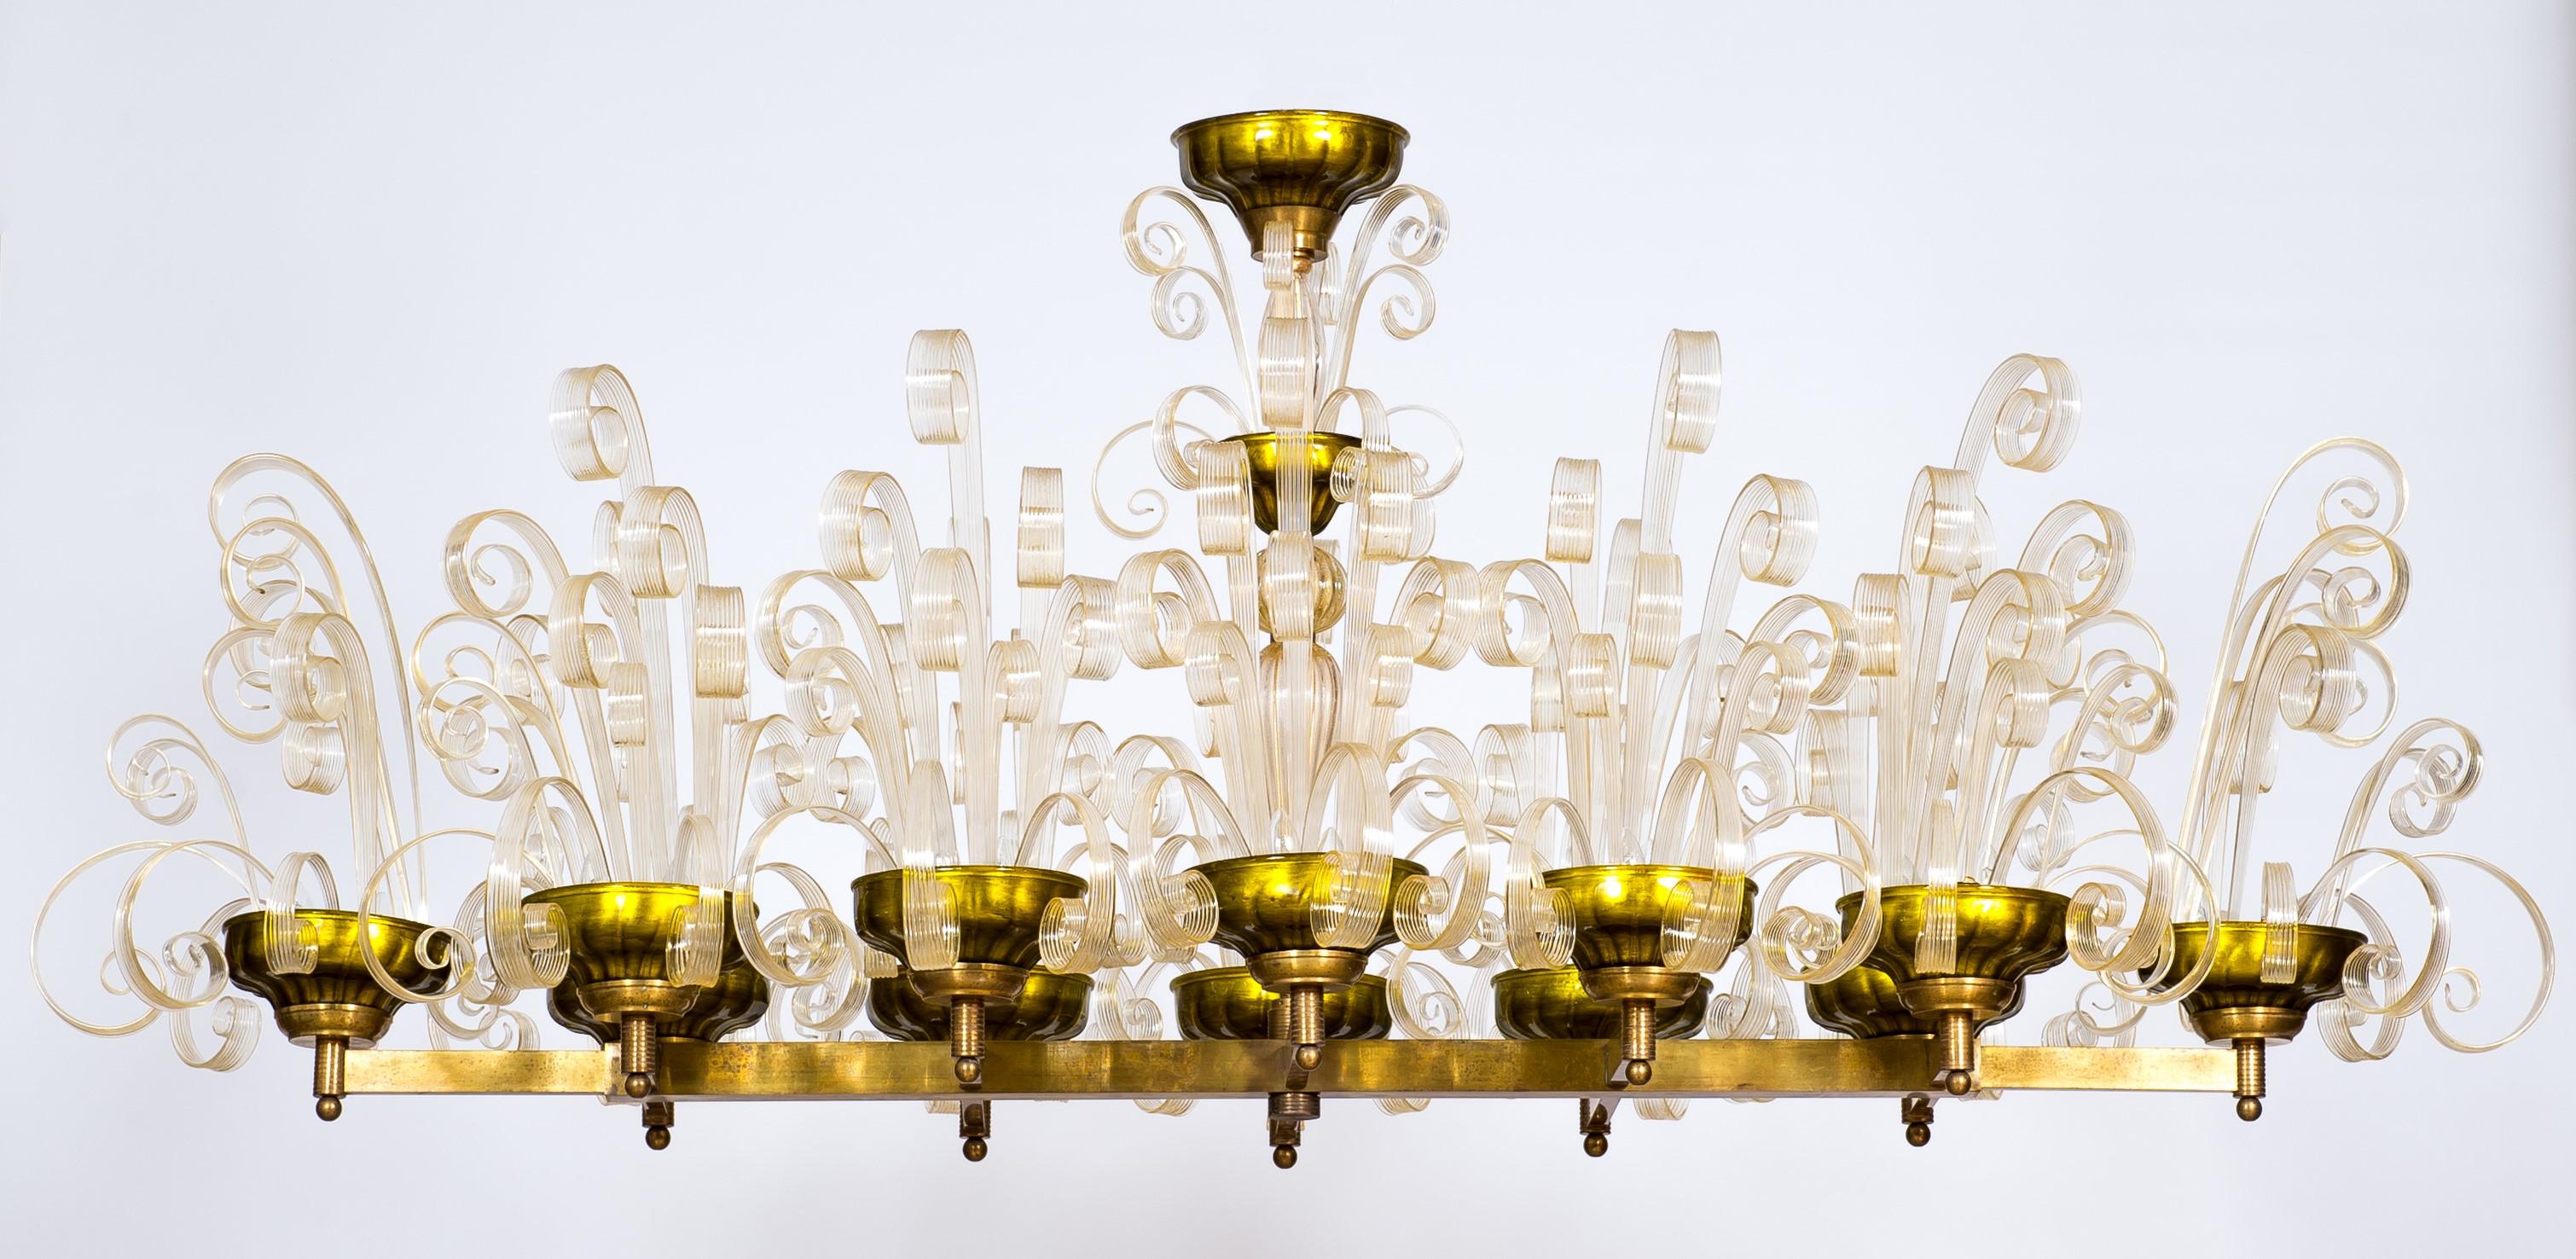 Brass Chandelier with Crosiers in Clear Murano Glass and Golden Leaf Italy 1970s

Entirely handmade of brass and blown Murano glass, this chandelier is a unique creation by the Italian artist and designer Giovanni Dalla Fina. The chandelier is